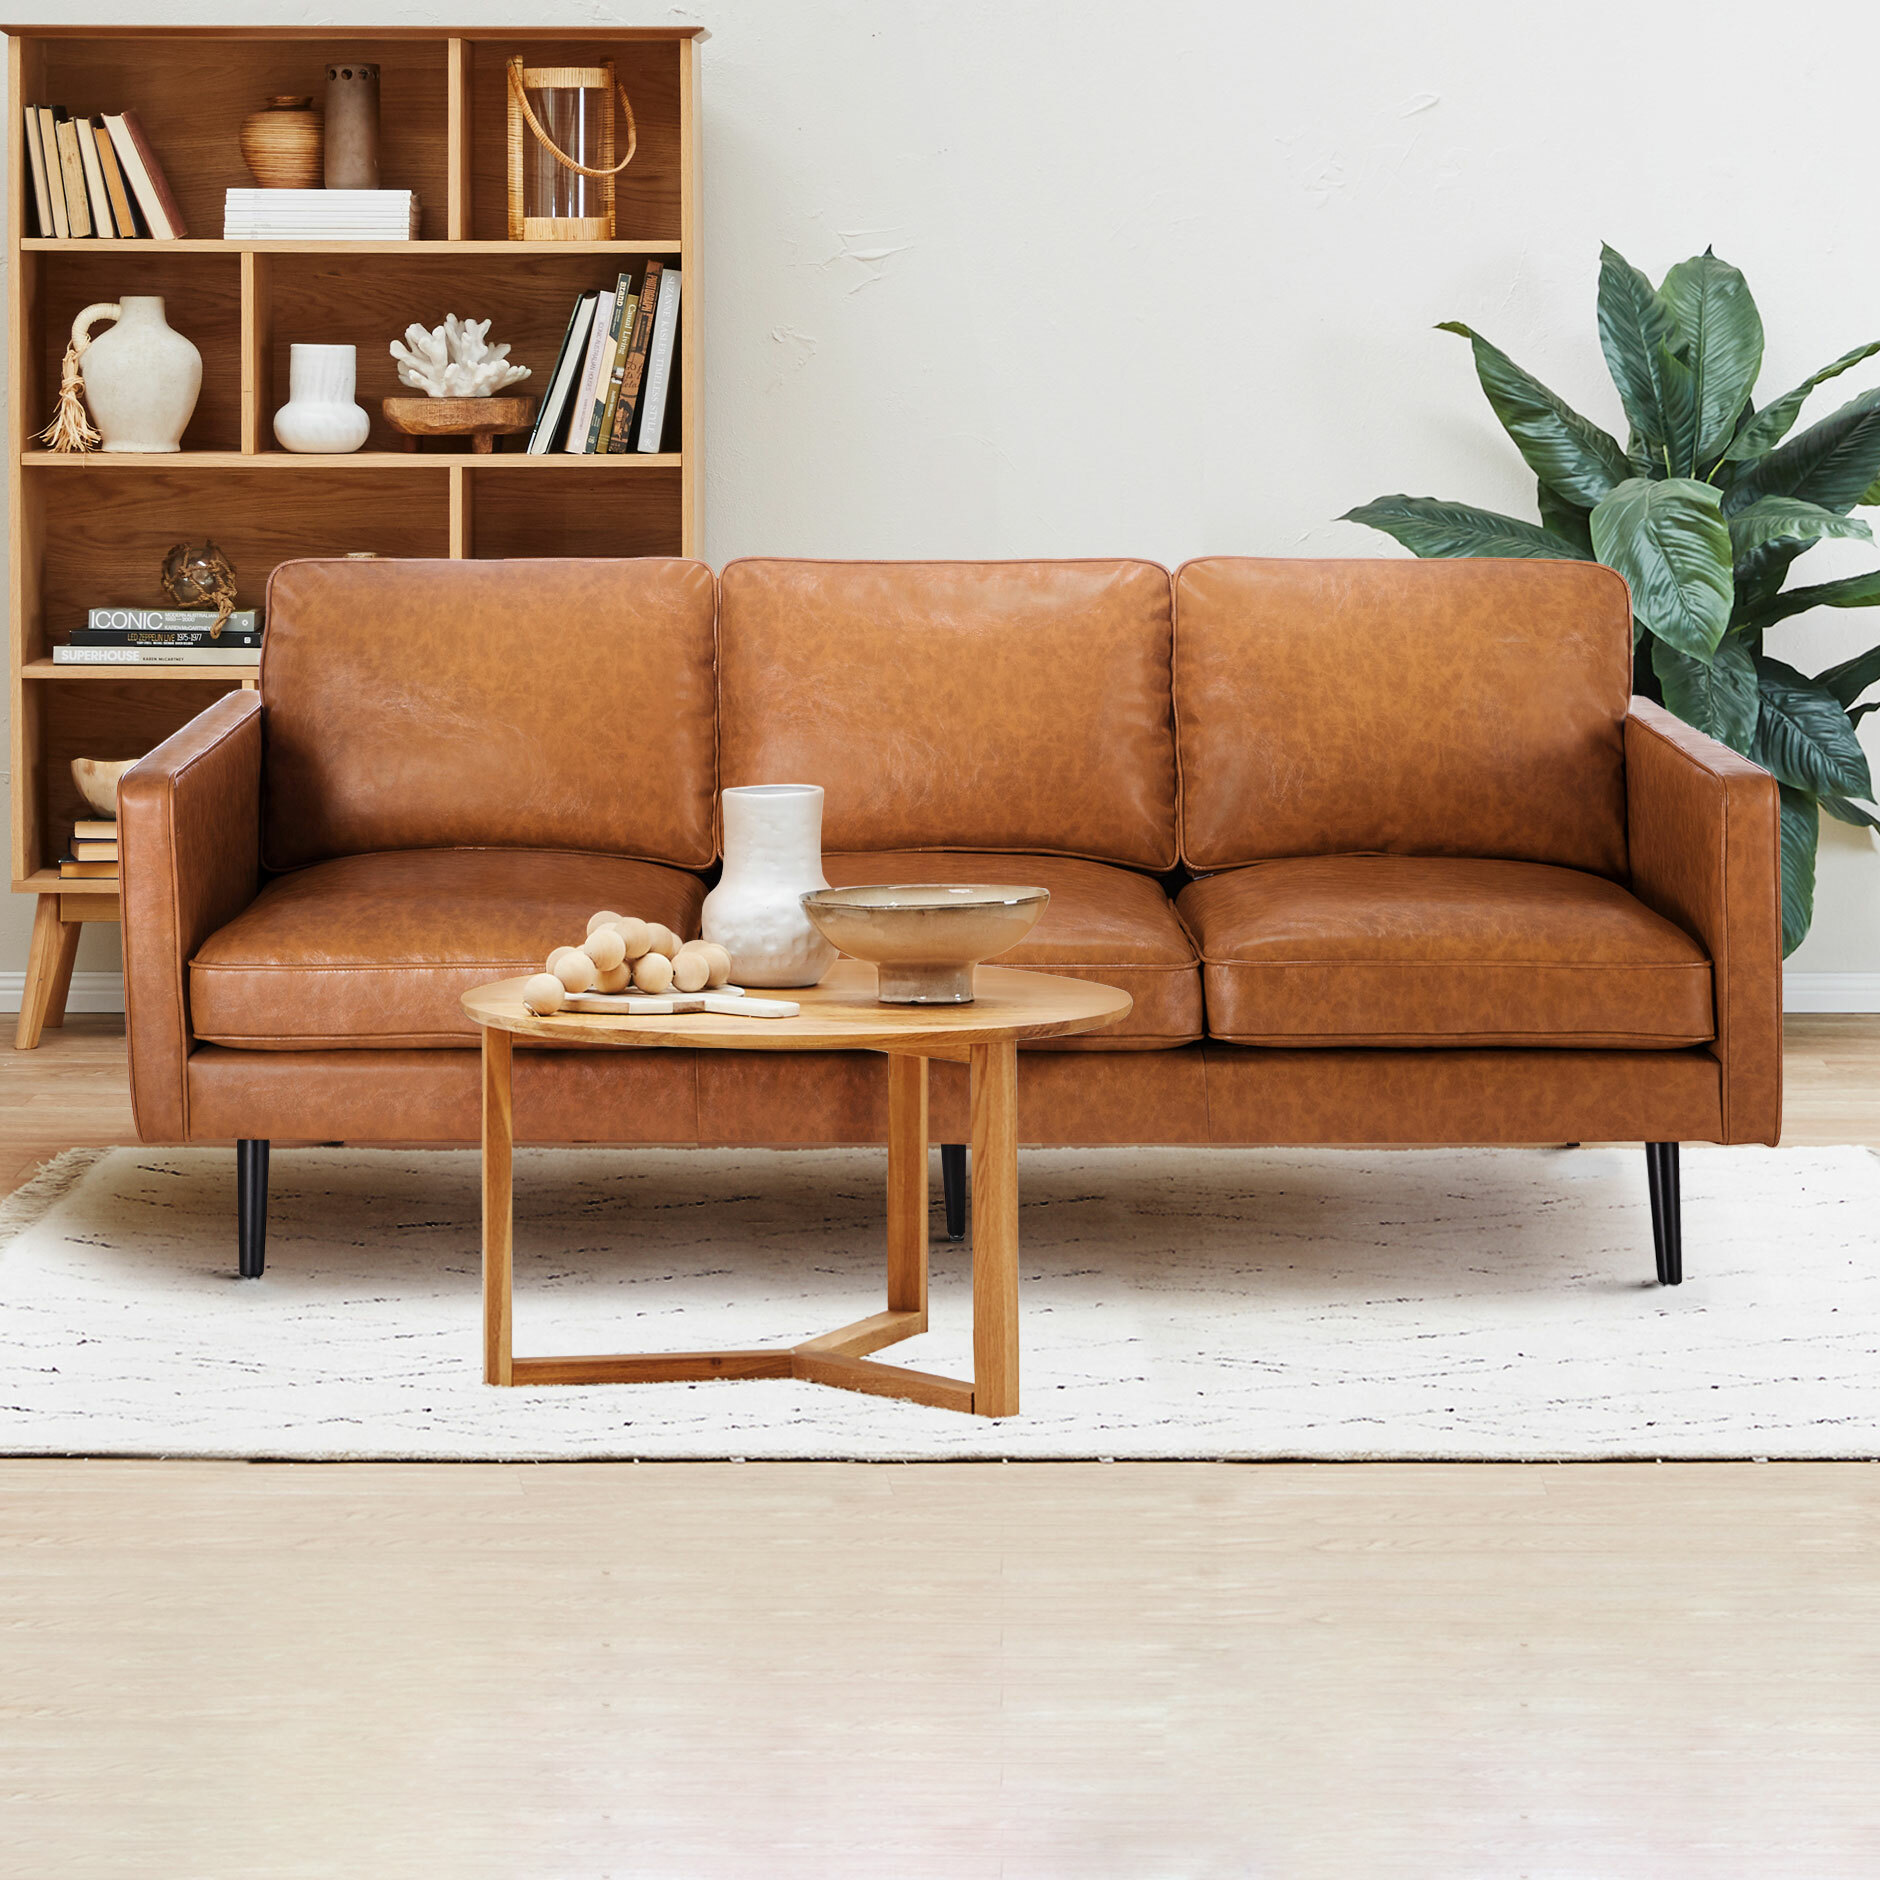 Faux Leather 3 Seater Sofa, Synthetic Leather Couch